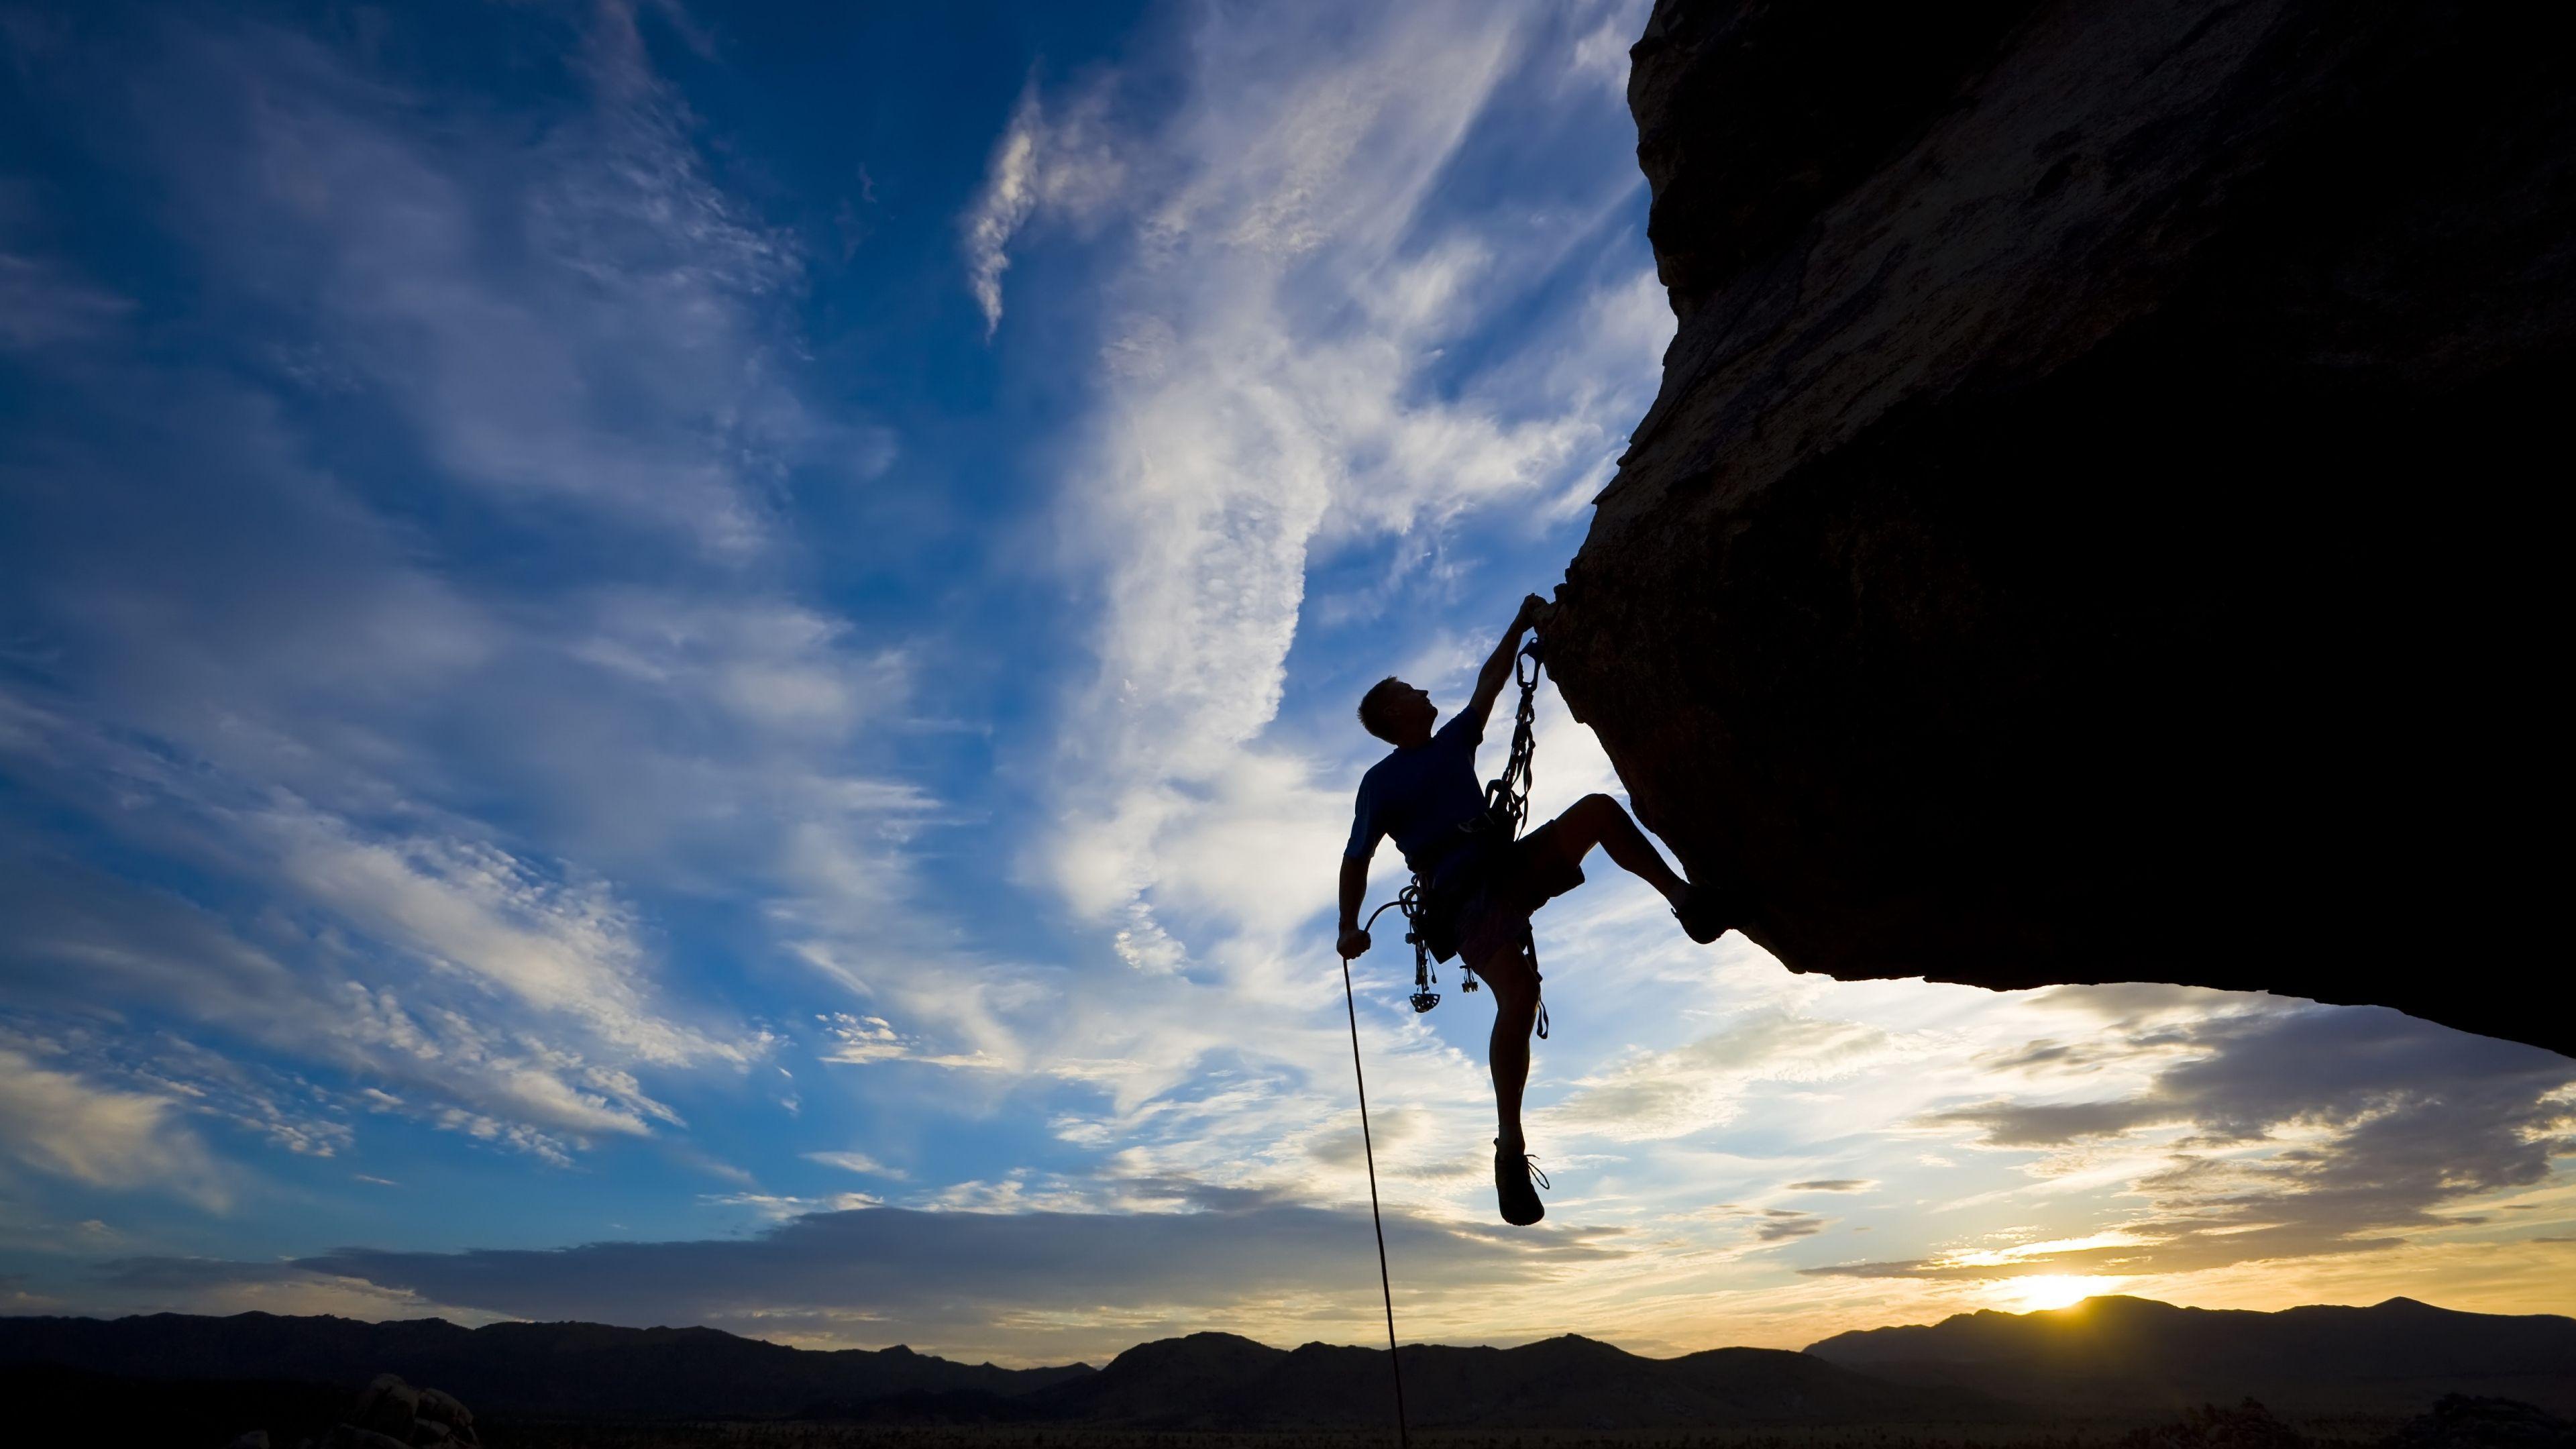 Download Wallpaper 3840x2160 Climber, Extreme, Silhouette